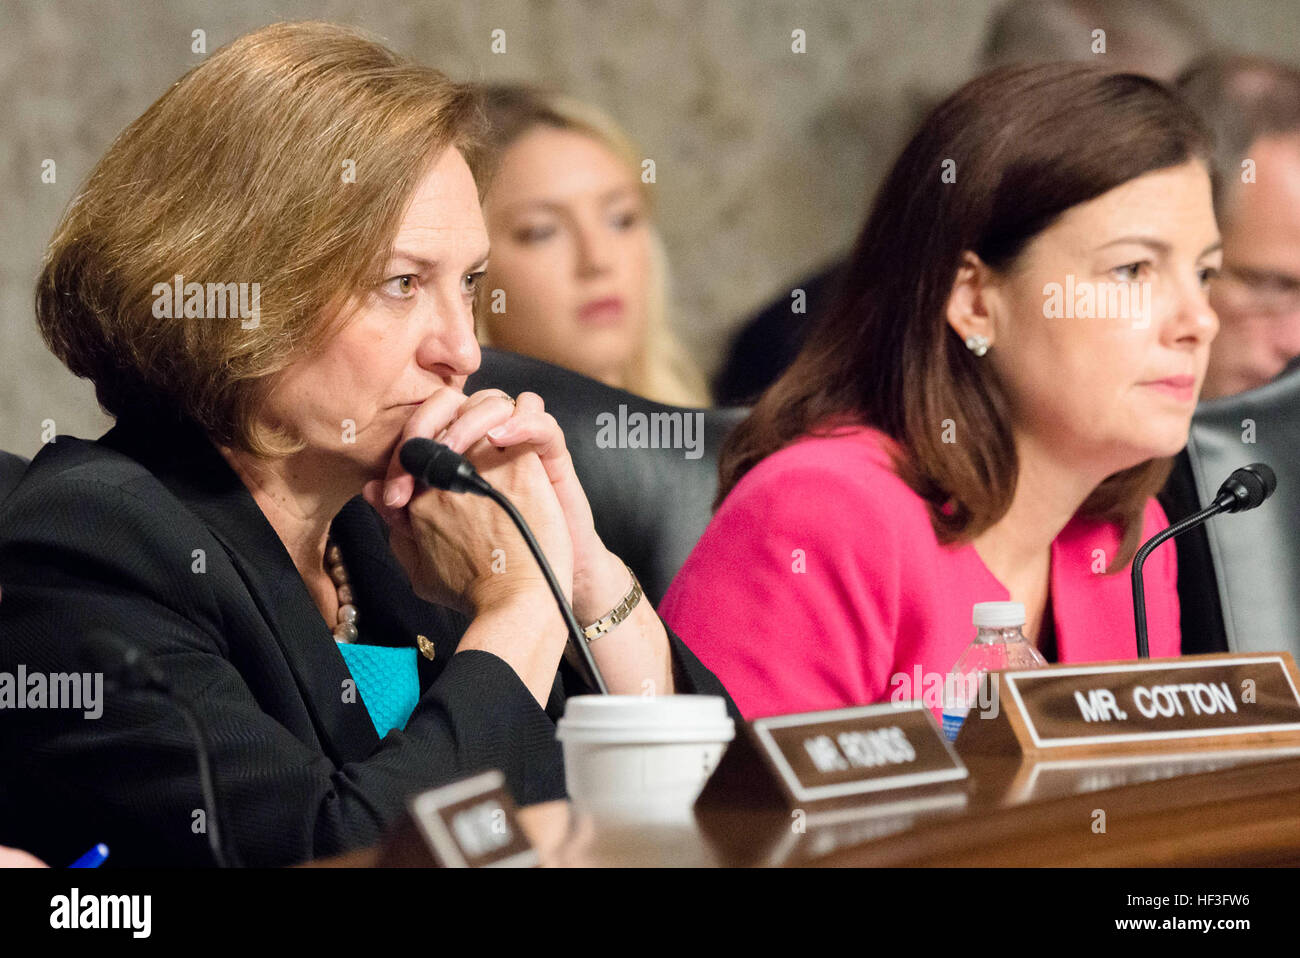 U.S. Senate Committee on Armed Services member Senators Deb Fischer and Kelly Ayotte listen to testimony from 18th Chairman of the Joint Chiefs of Staff Gen. Martin E. Dempsey and Secretary of Defense Ashton B. Carter during a hearing discussing Counter-ISIL (Islamic State of Iraq and the Levant) Strategy, on Capitol Hill, July 7, 2015. (DoD photo by Army Staff Sgt. Sean K. Harp/Released) SECDEF CJCS testify before SASC on ISIL 150707-D-HU462-157 Stock Photo